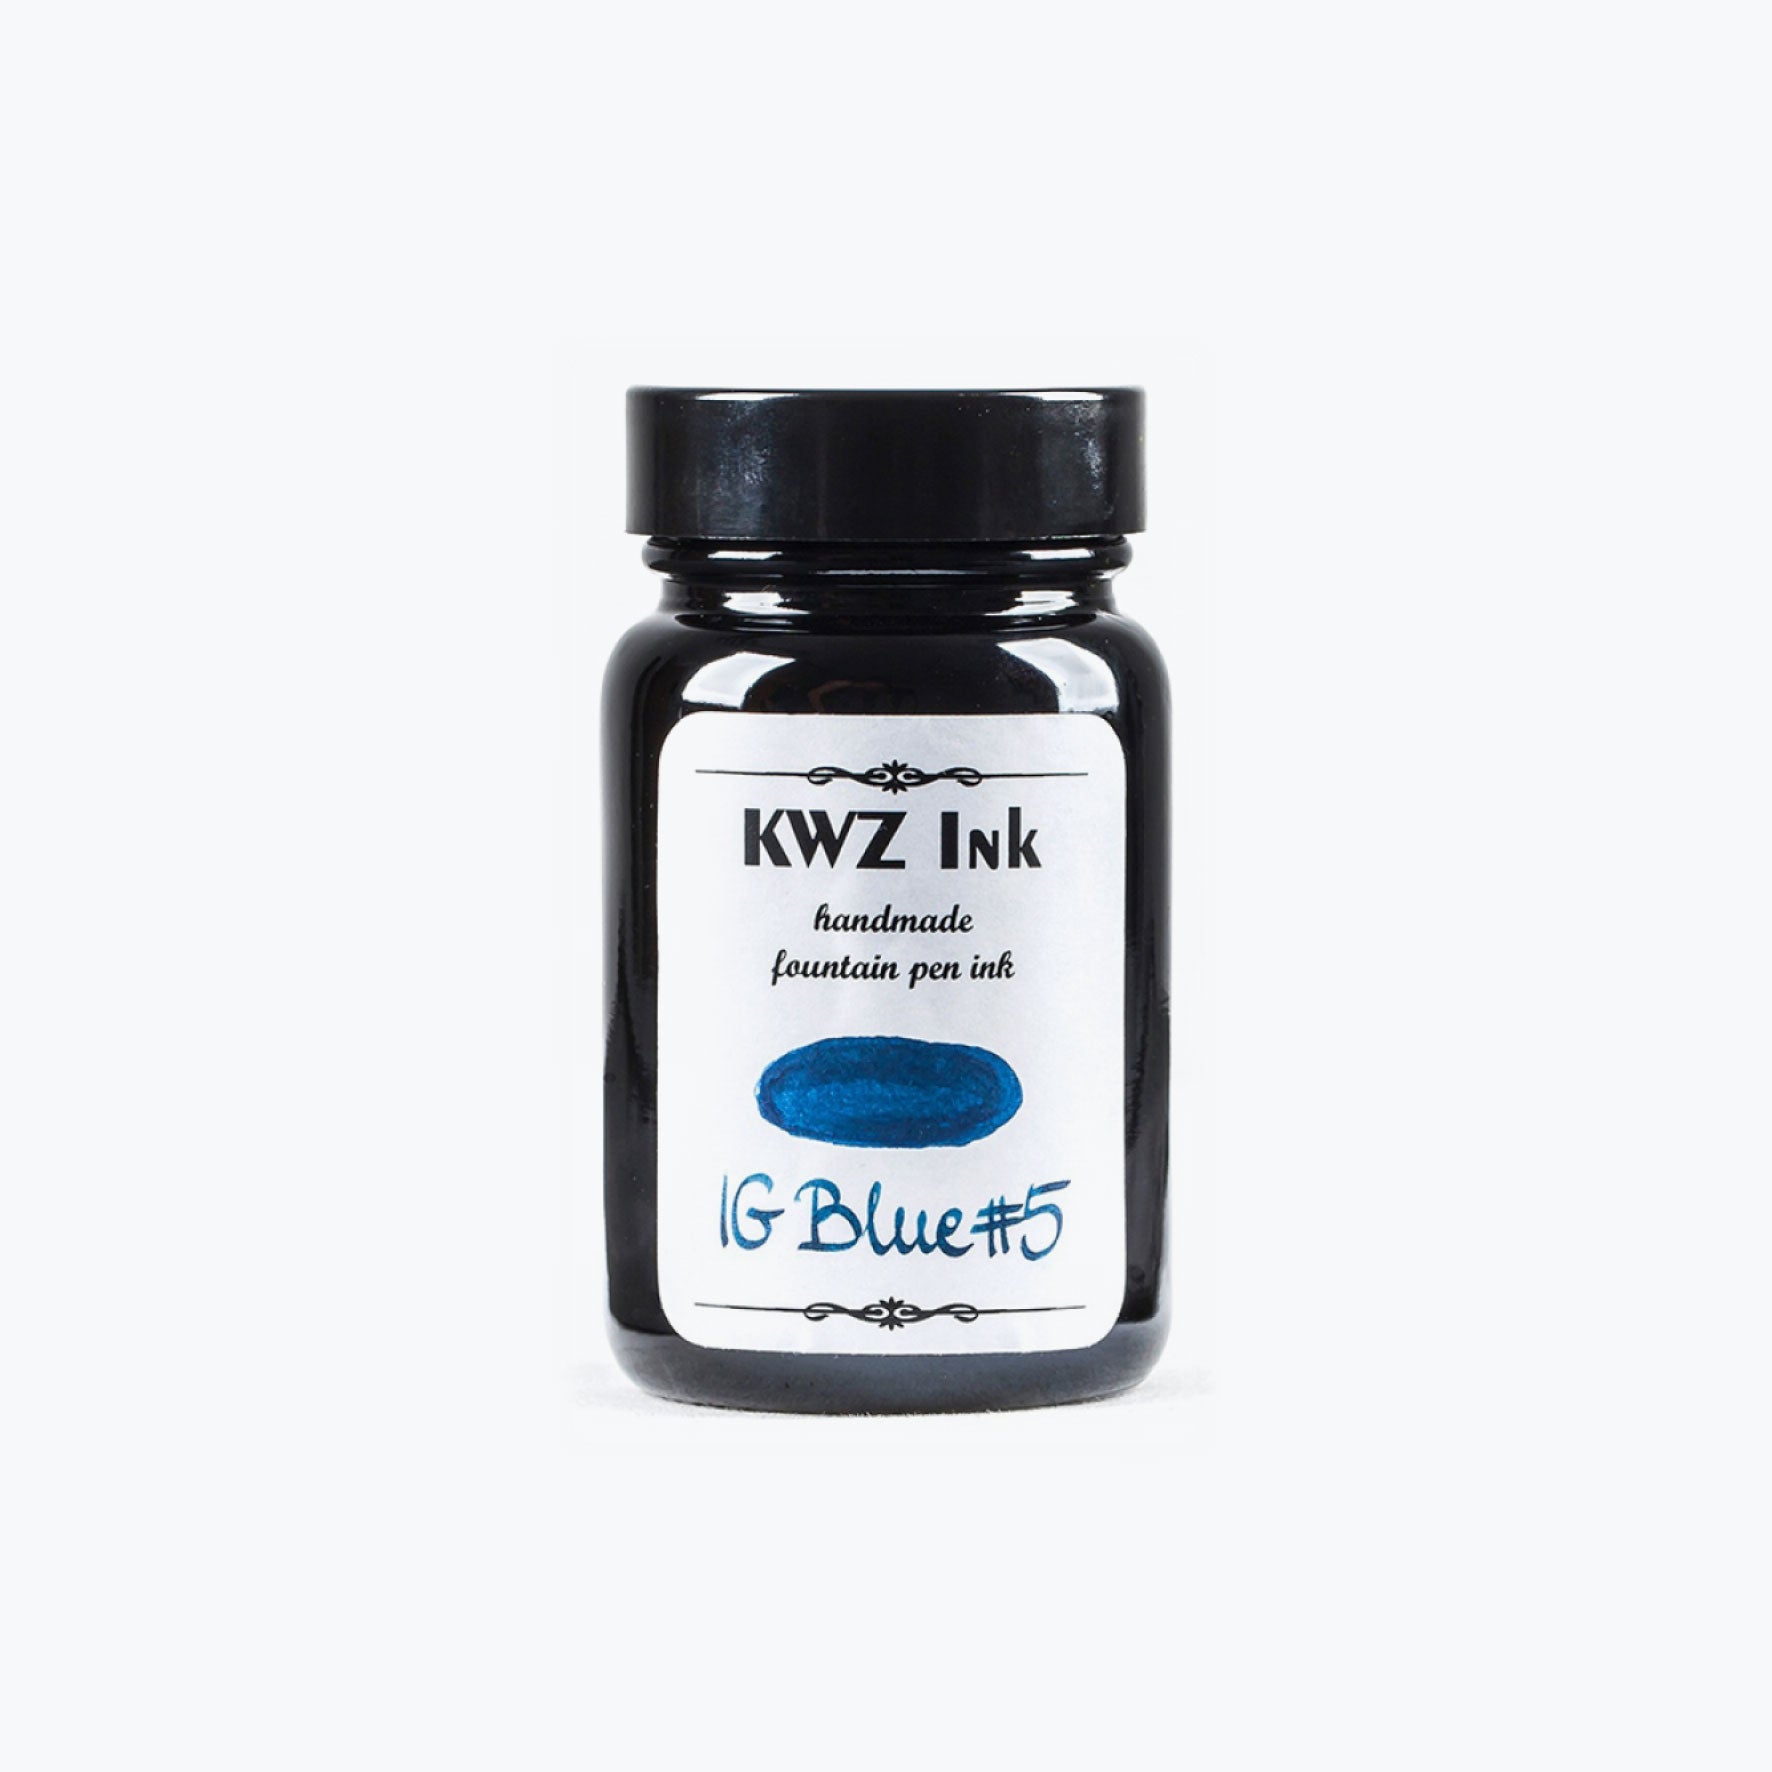 KWZ - Fountain Pen Ink - Iron Gall - IG Blue #5